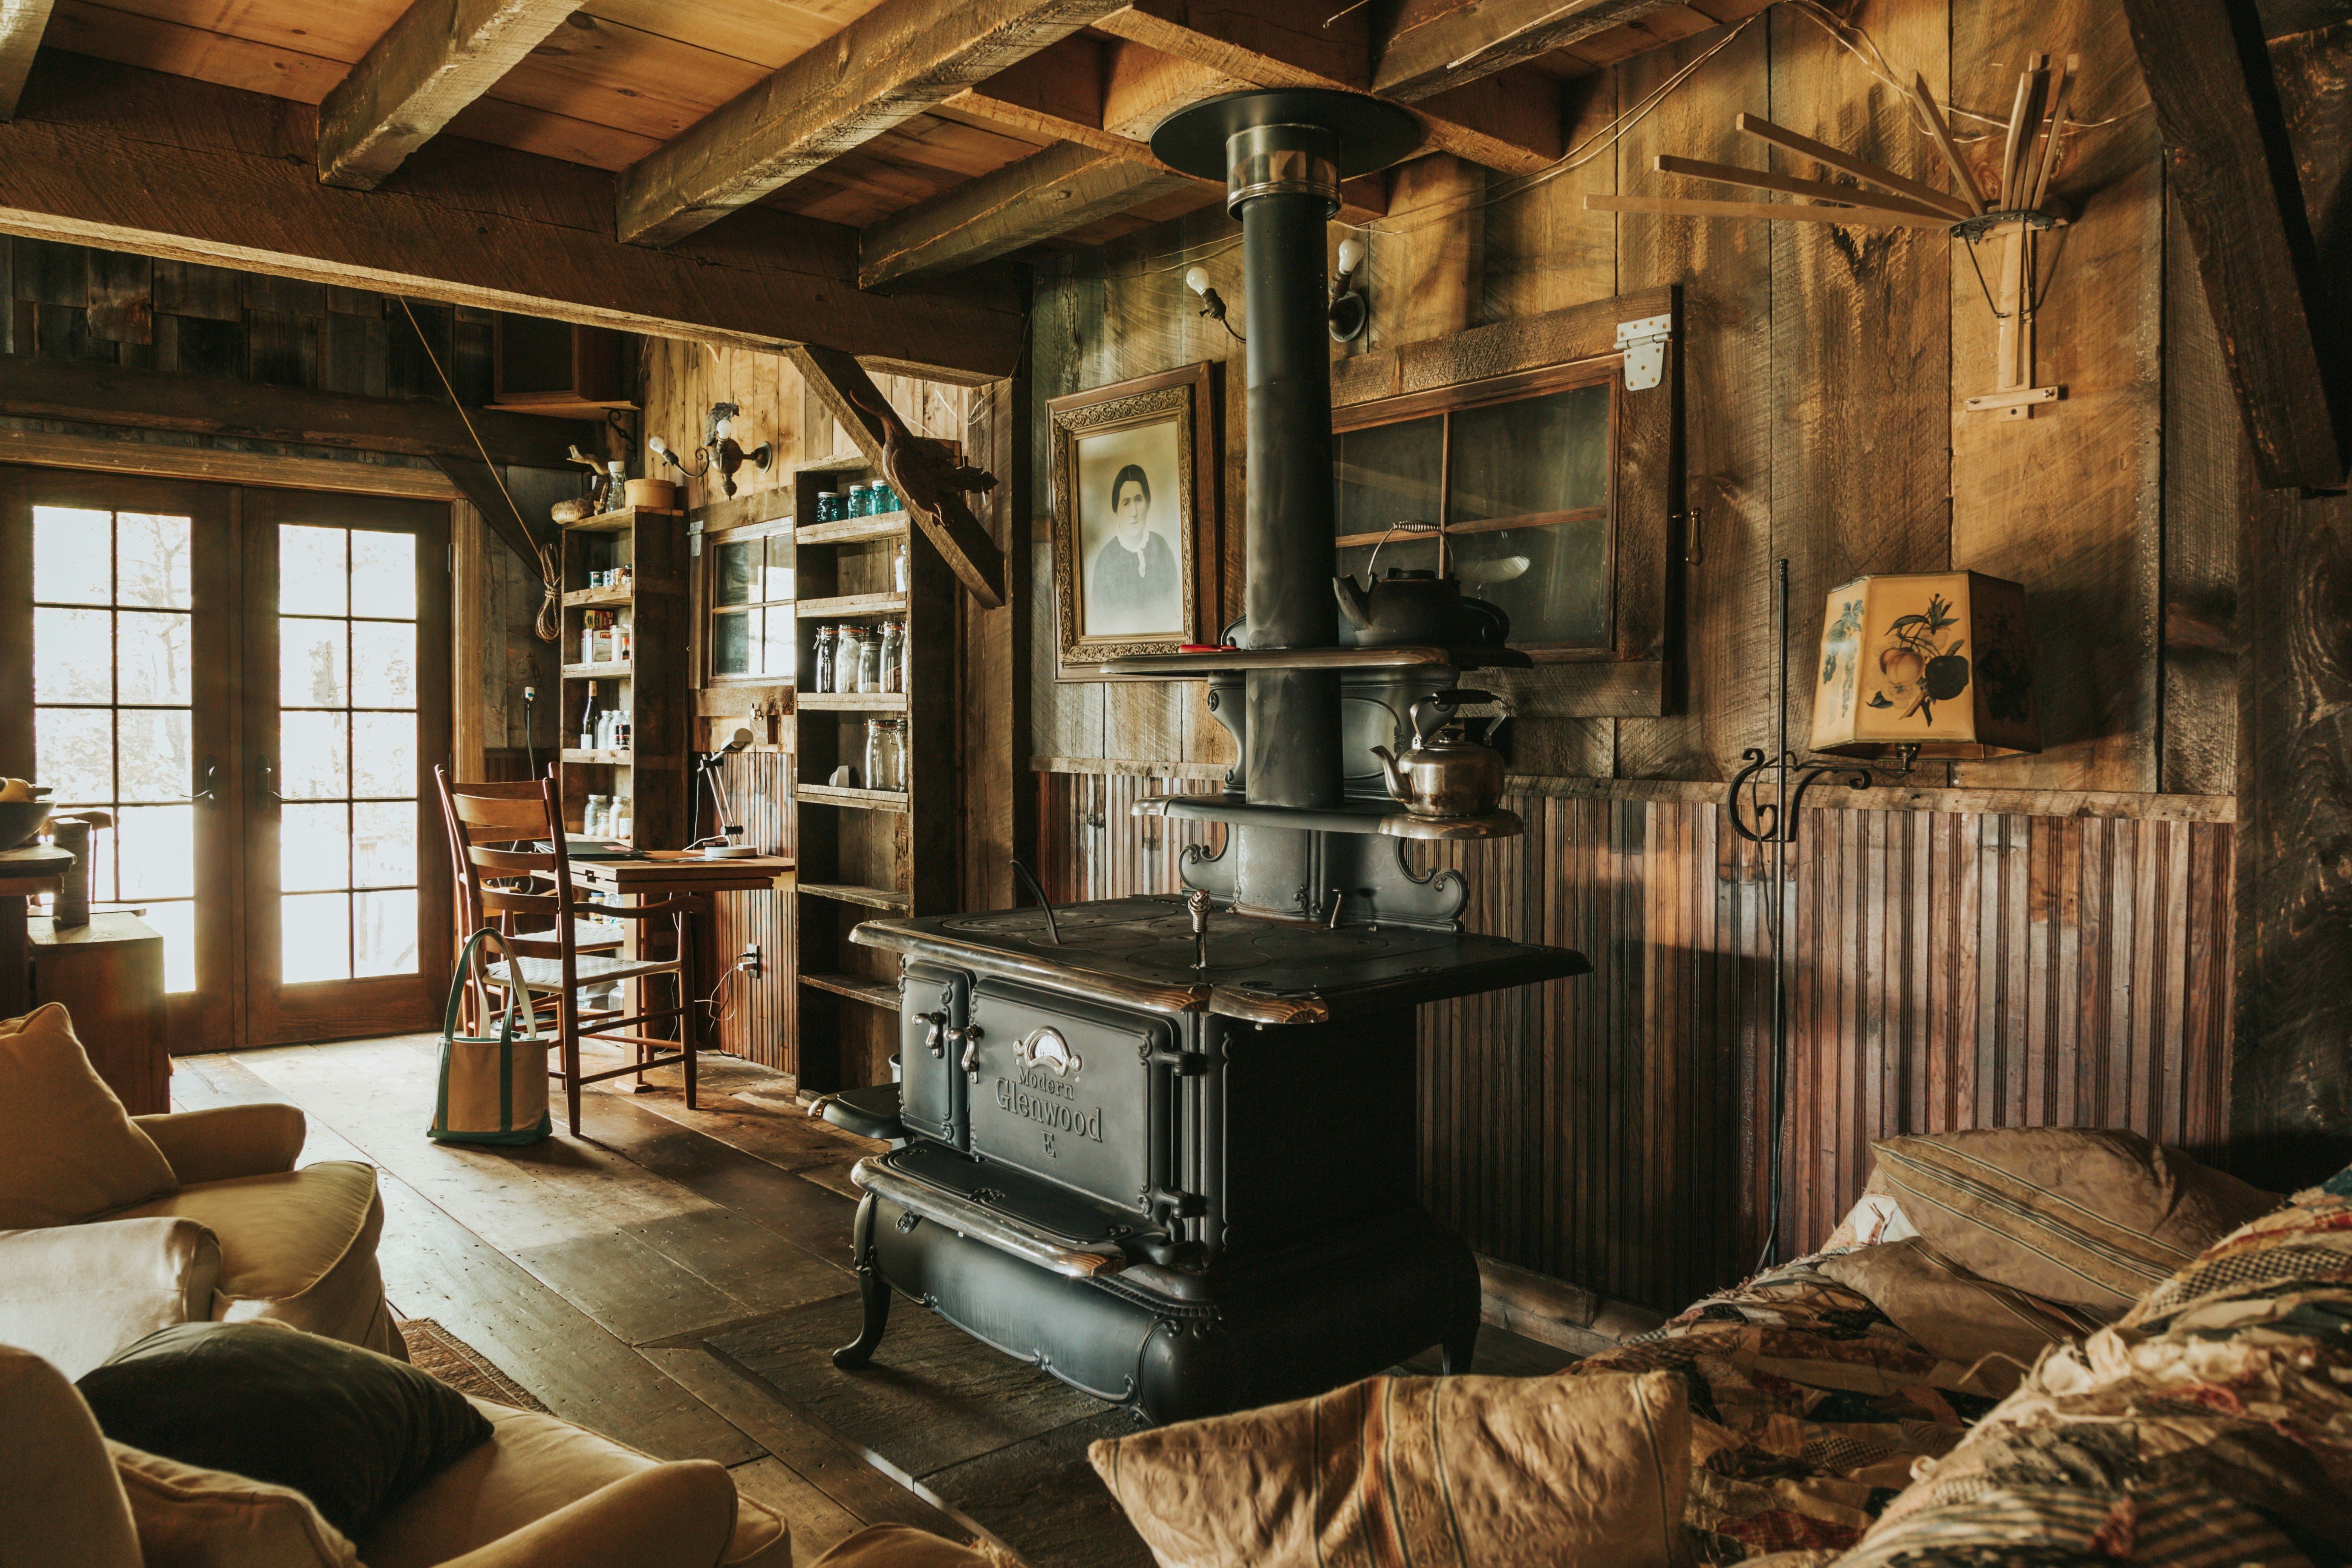 The inside of a cosy, wood-panelled cabin. The main focal point of the room is a large, black, cast iron range, and comfy chairs are arranged around it.